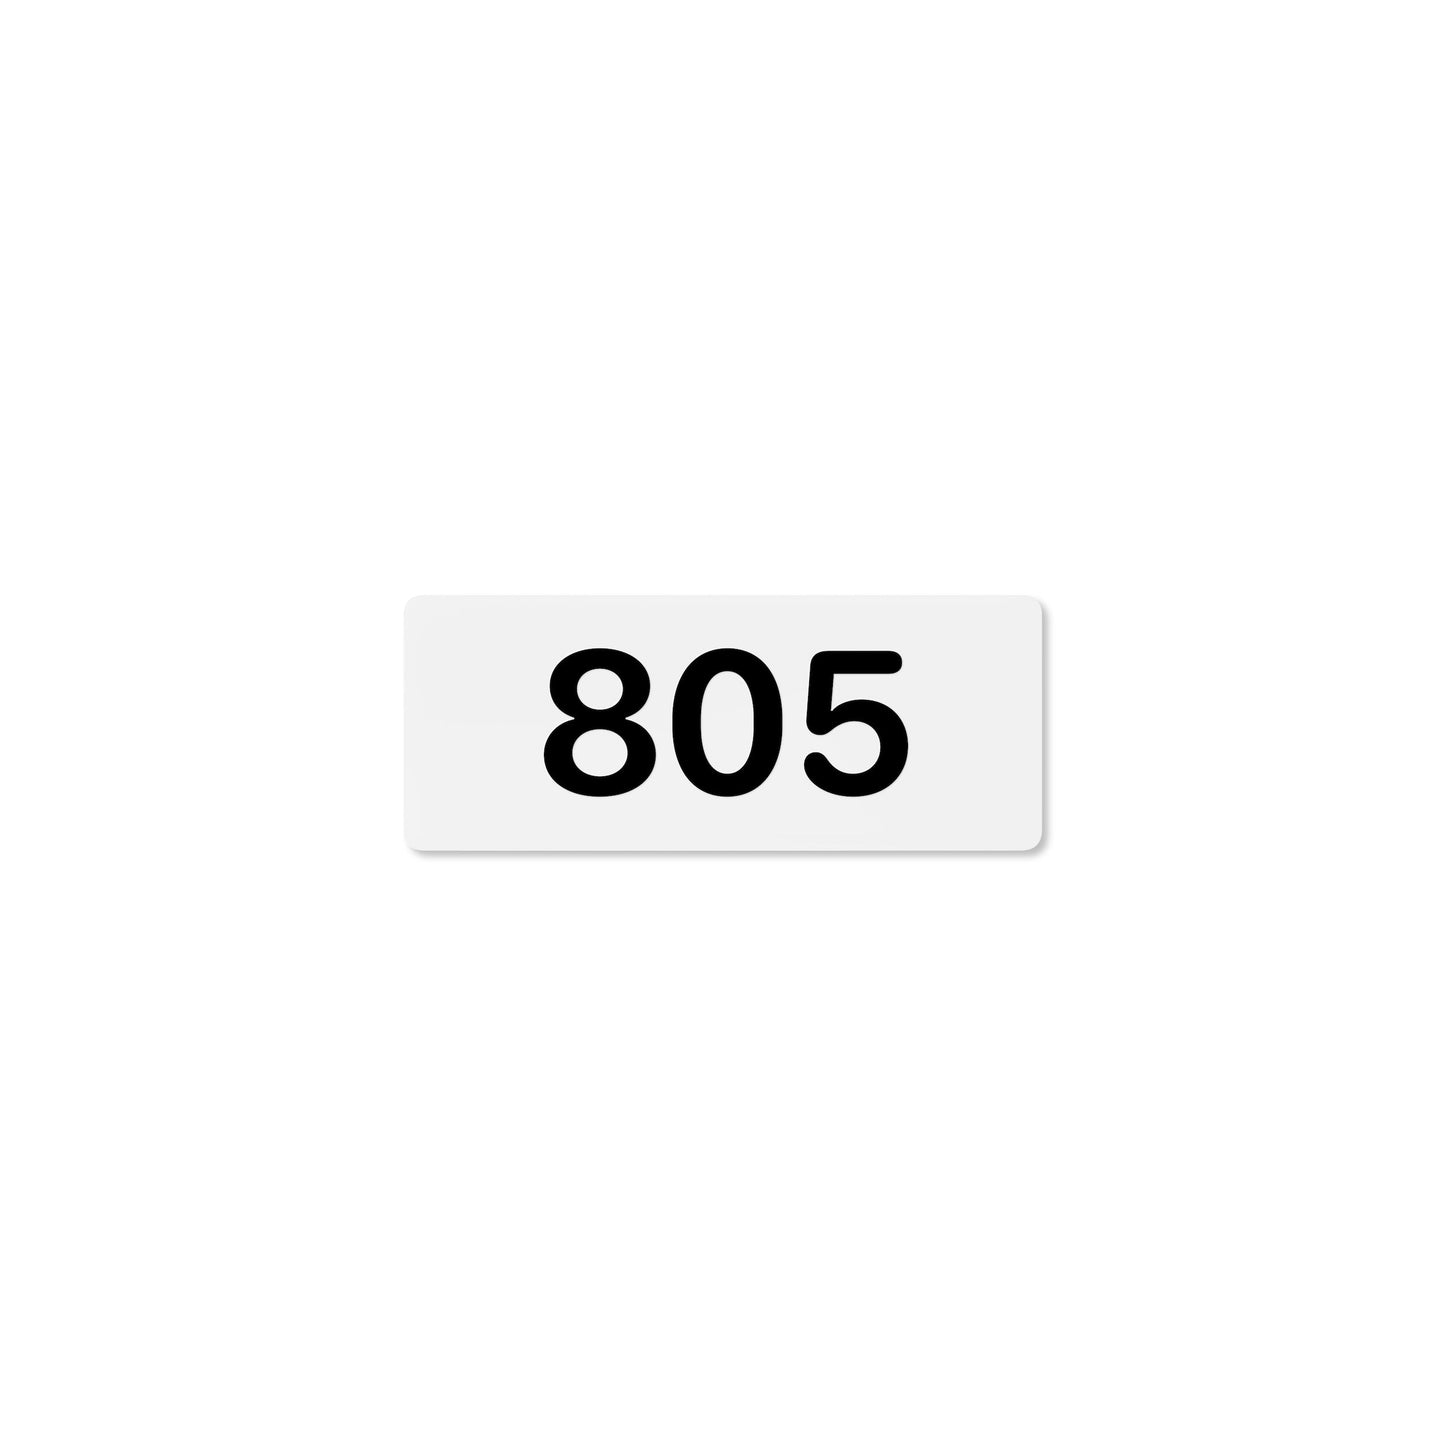 Numeral 805